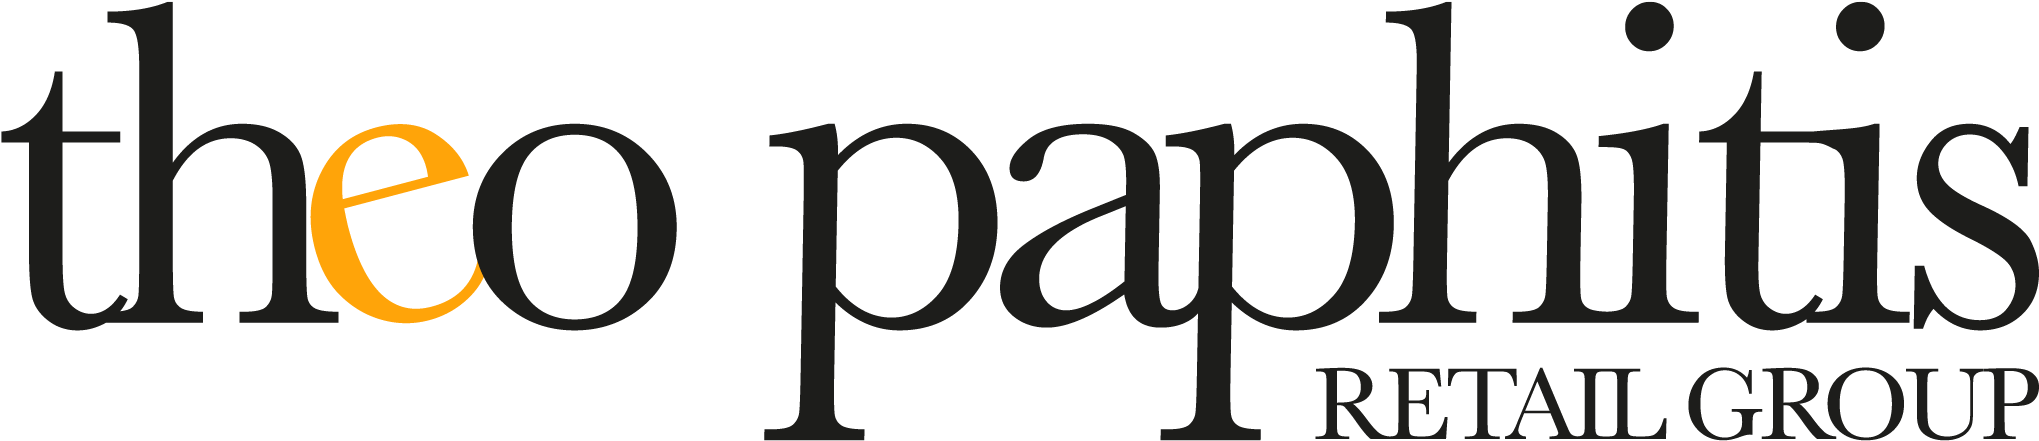 Logo - Theo Paphitis Retail Group (2327x495), Png Download